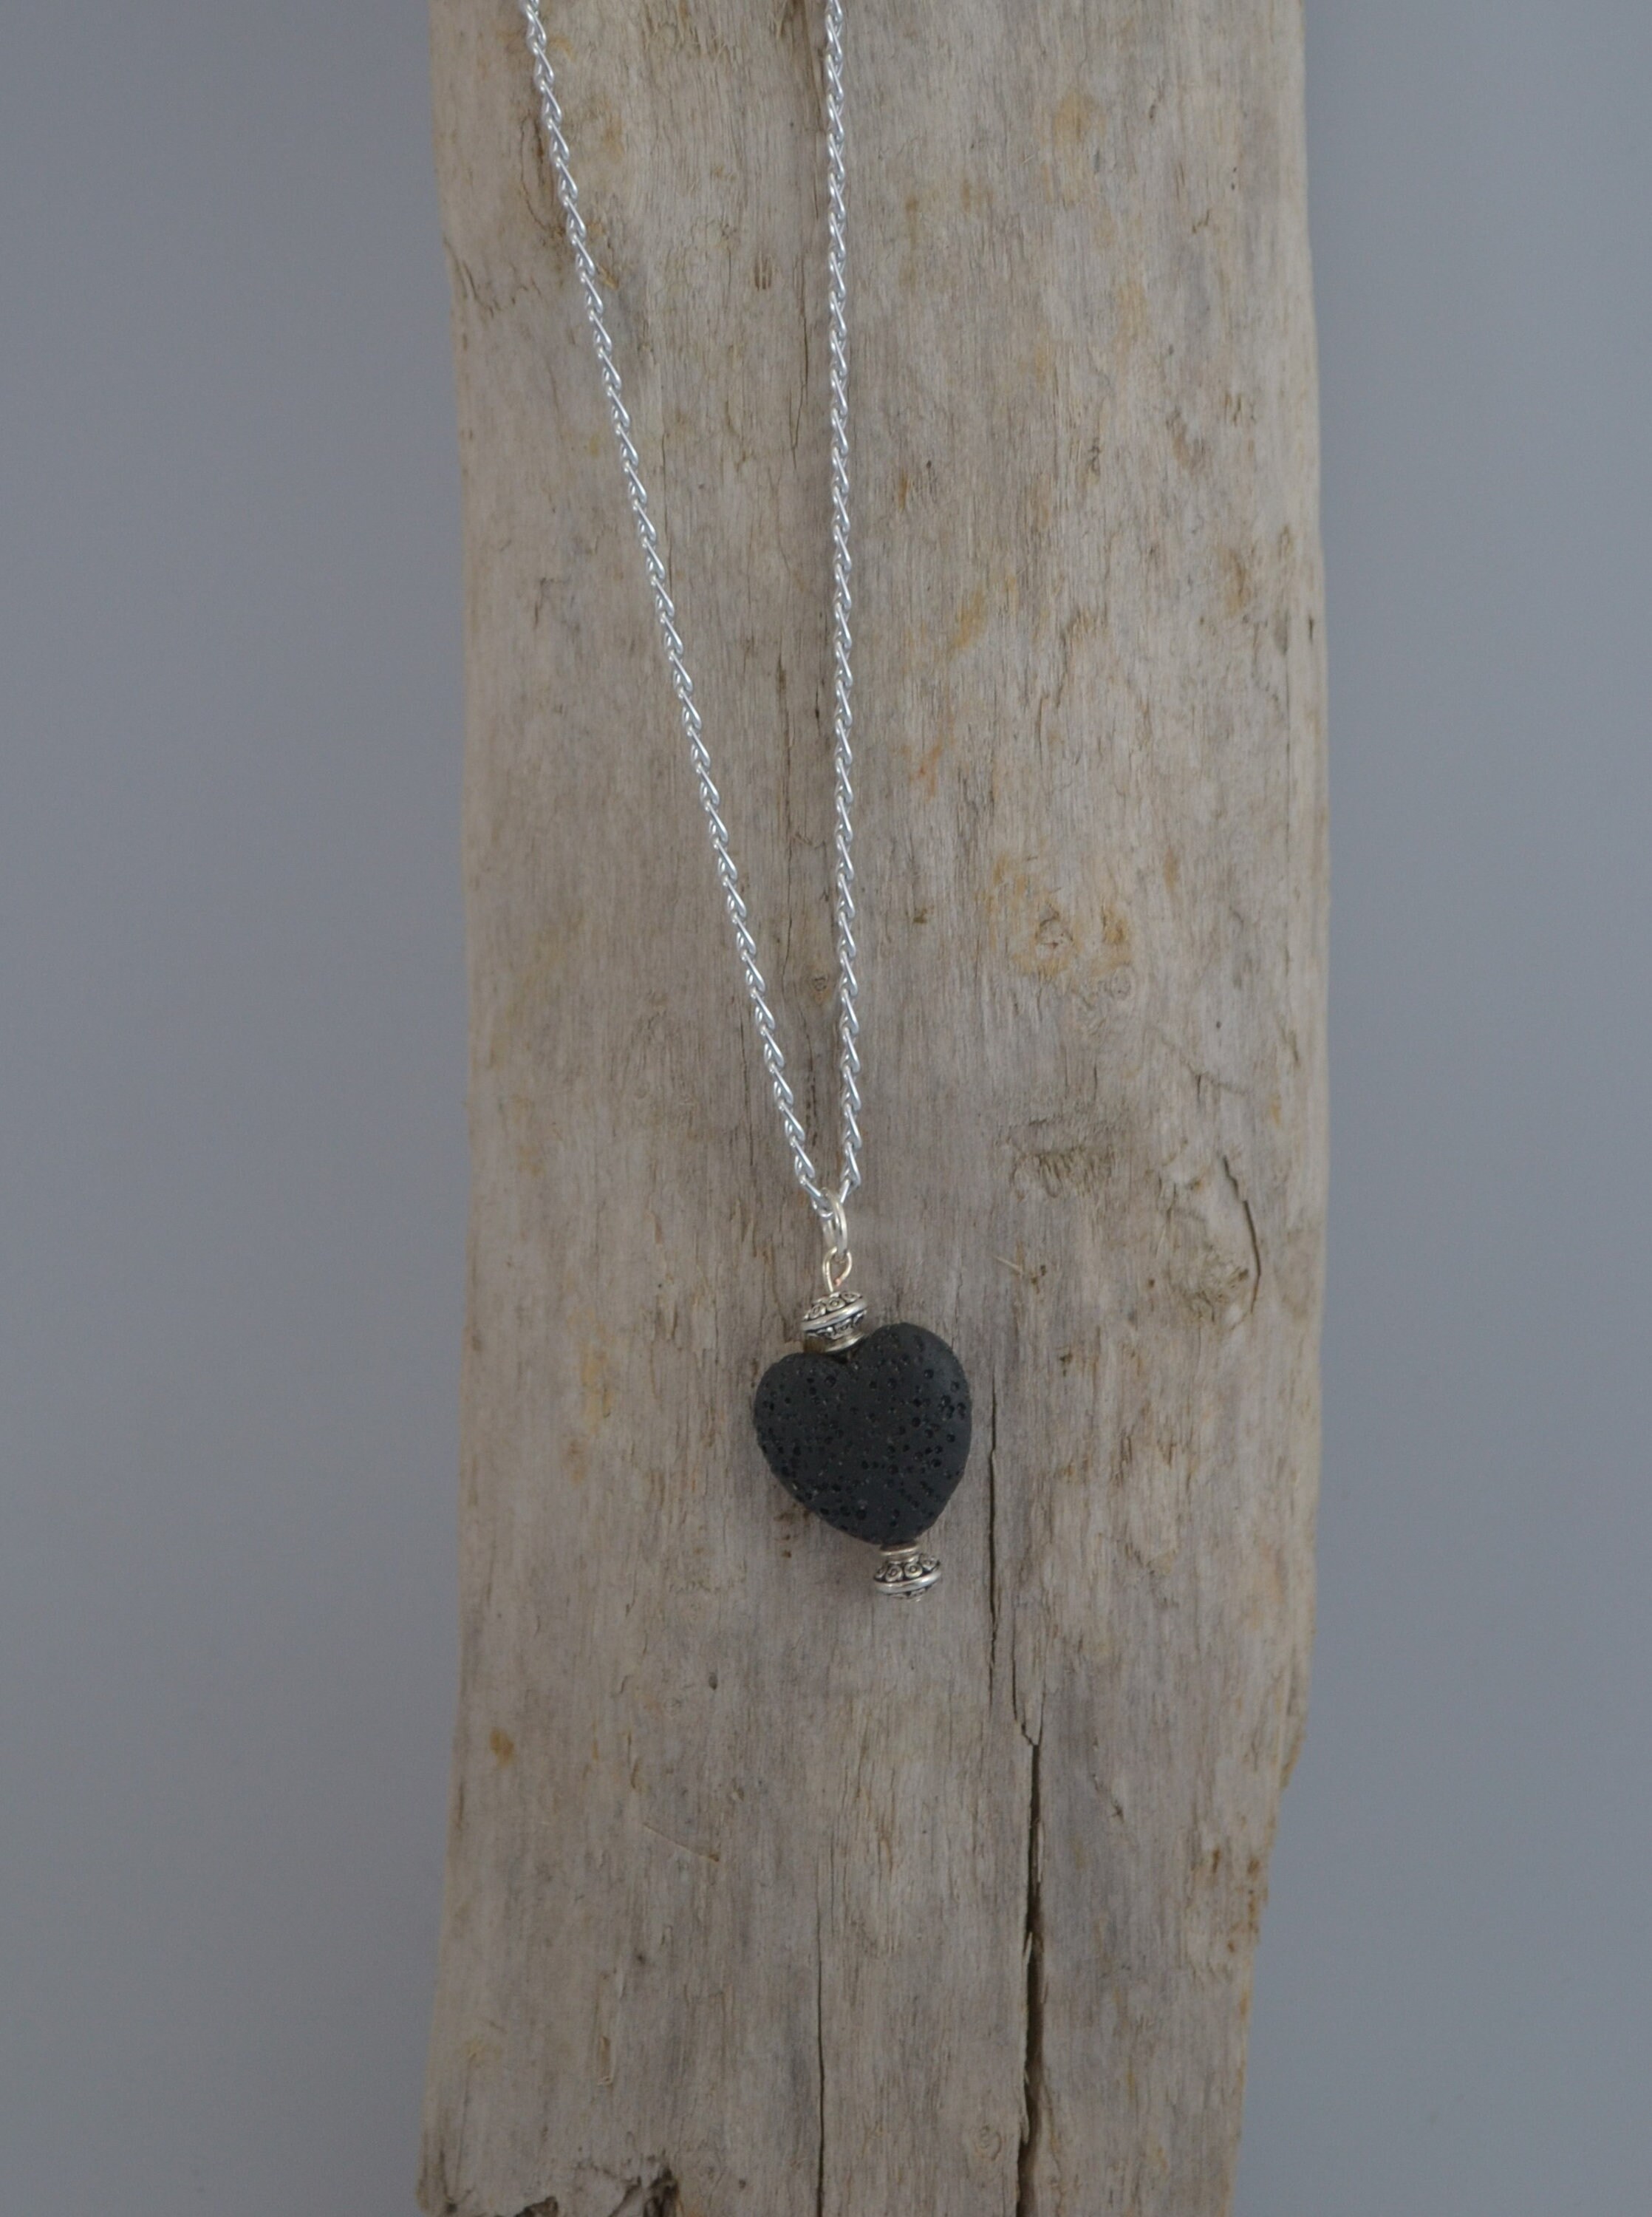 LAVA ROCK DIFFUSER Necklace/ Lava Bead Necklace/ Mindfulness - Etsy